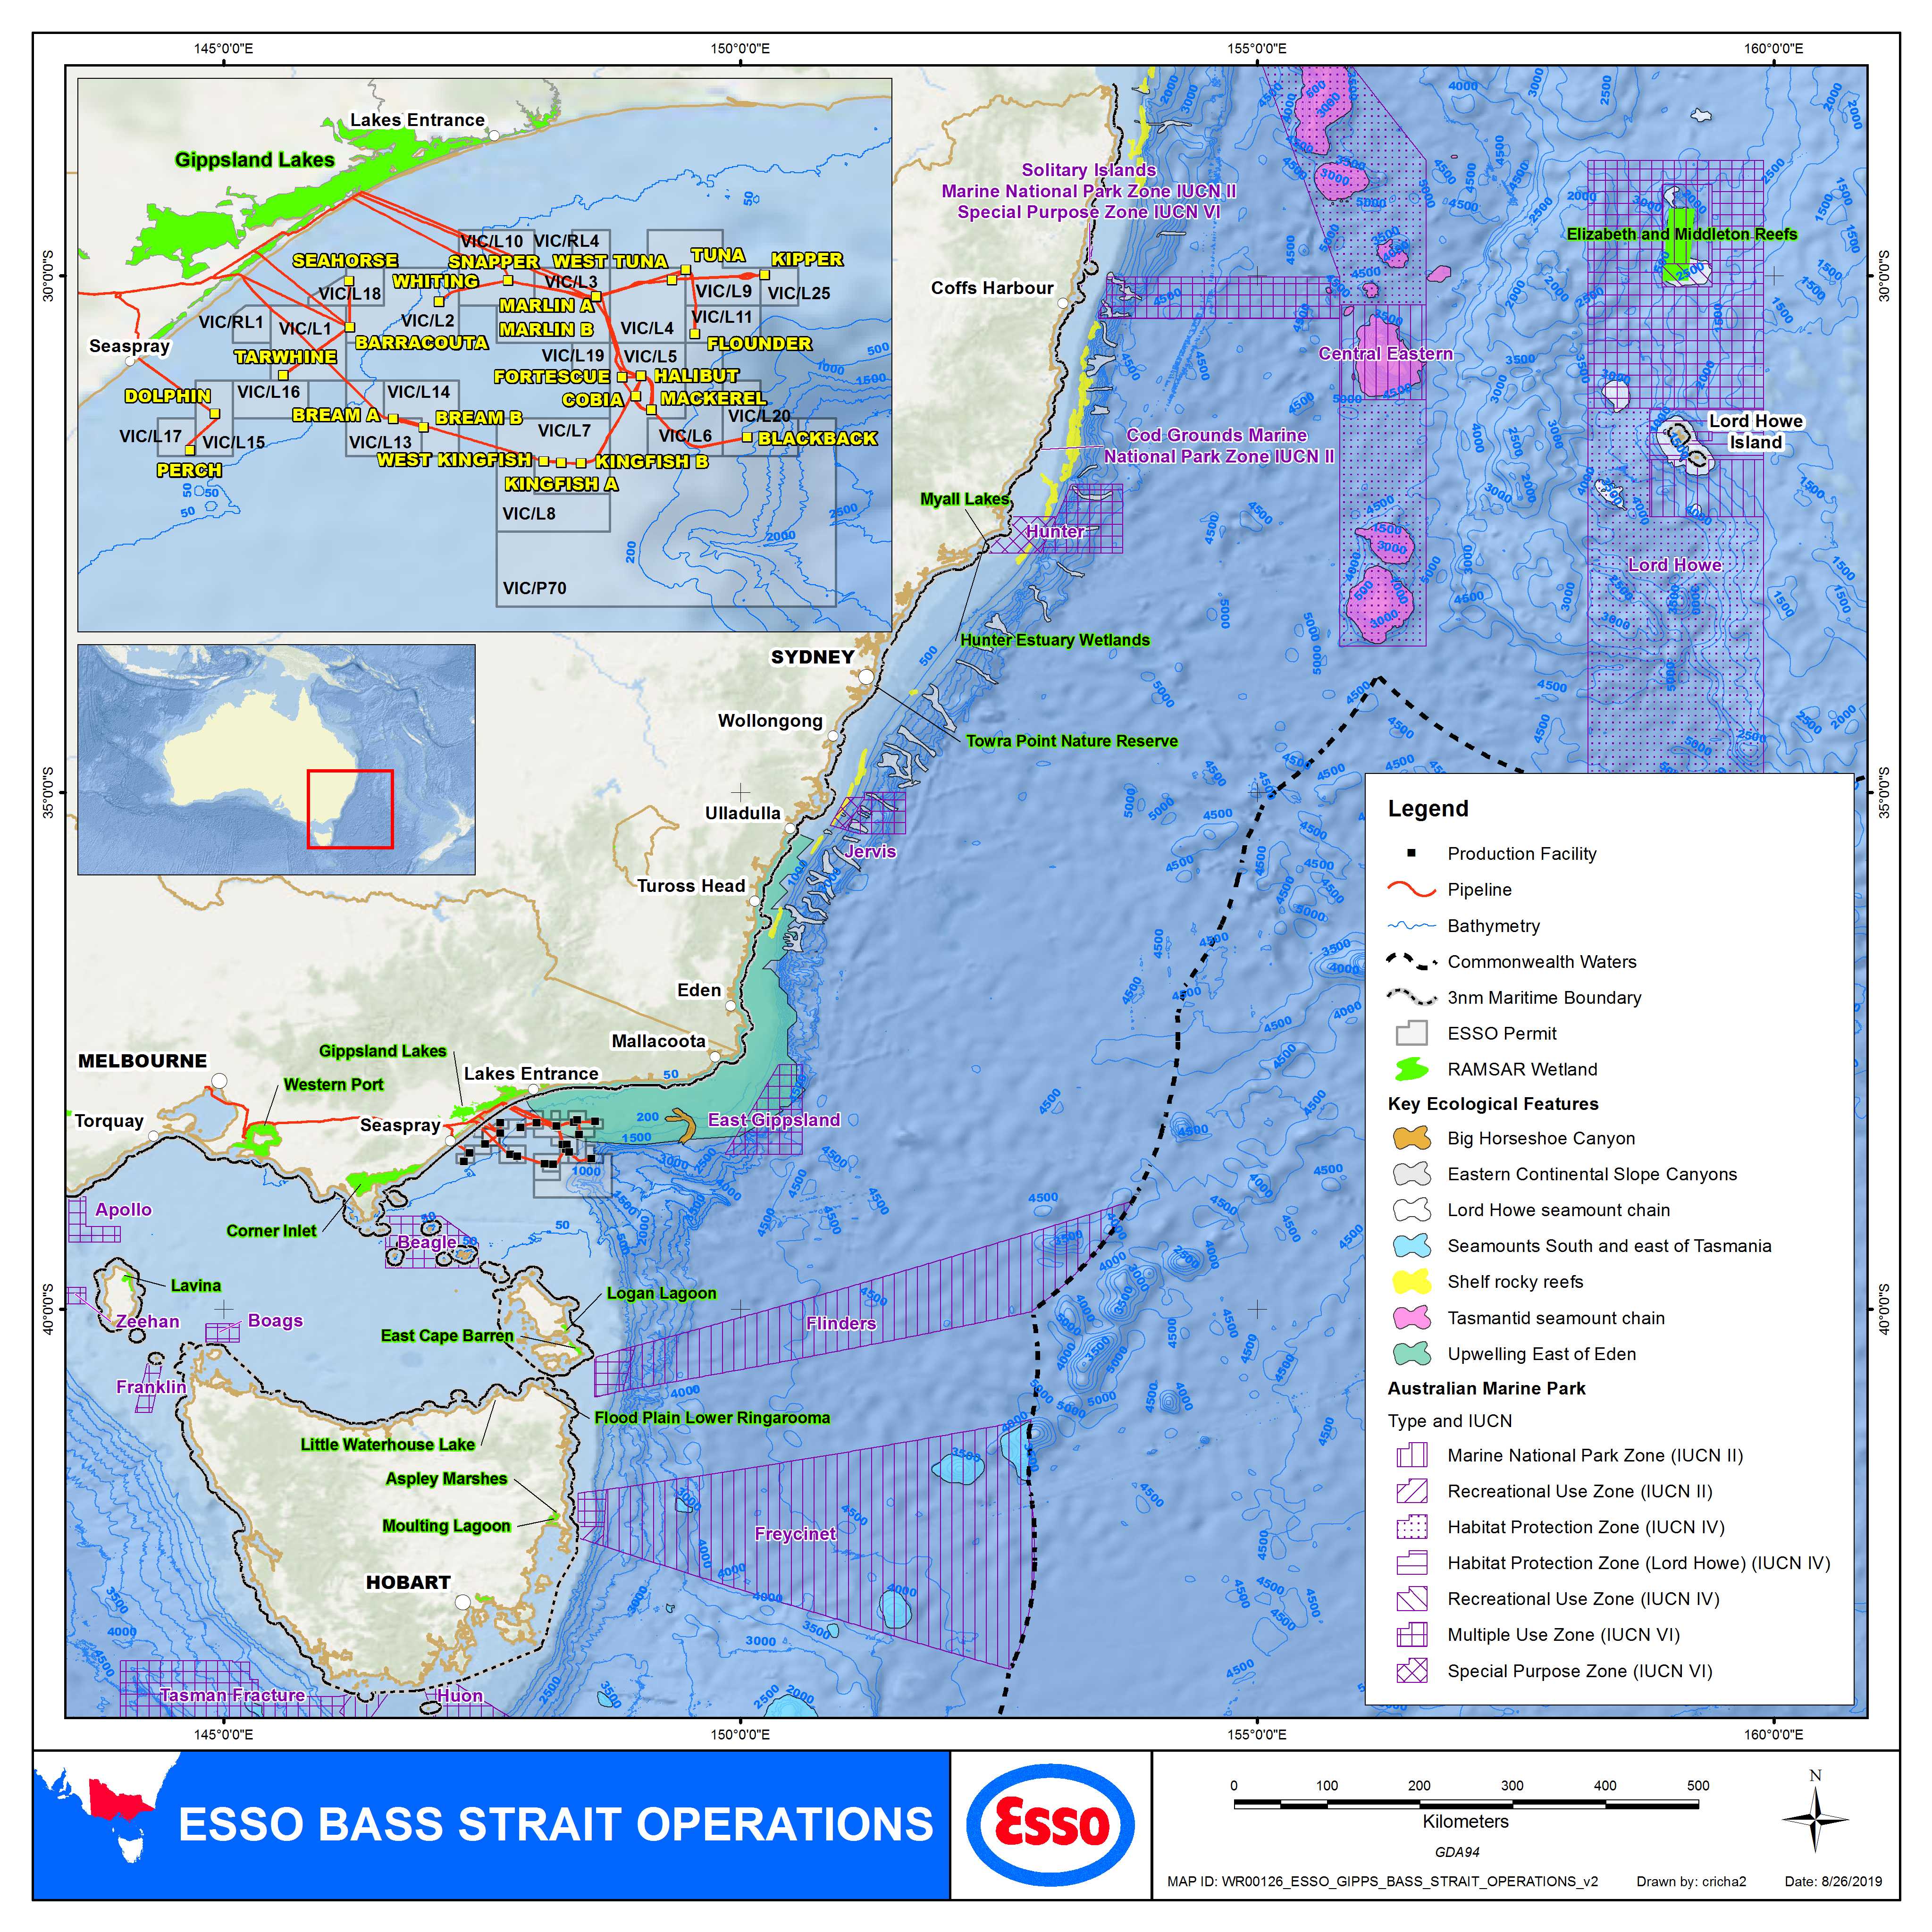 Location map - Activity: Bass Strait Operations (refer to description)